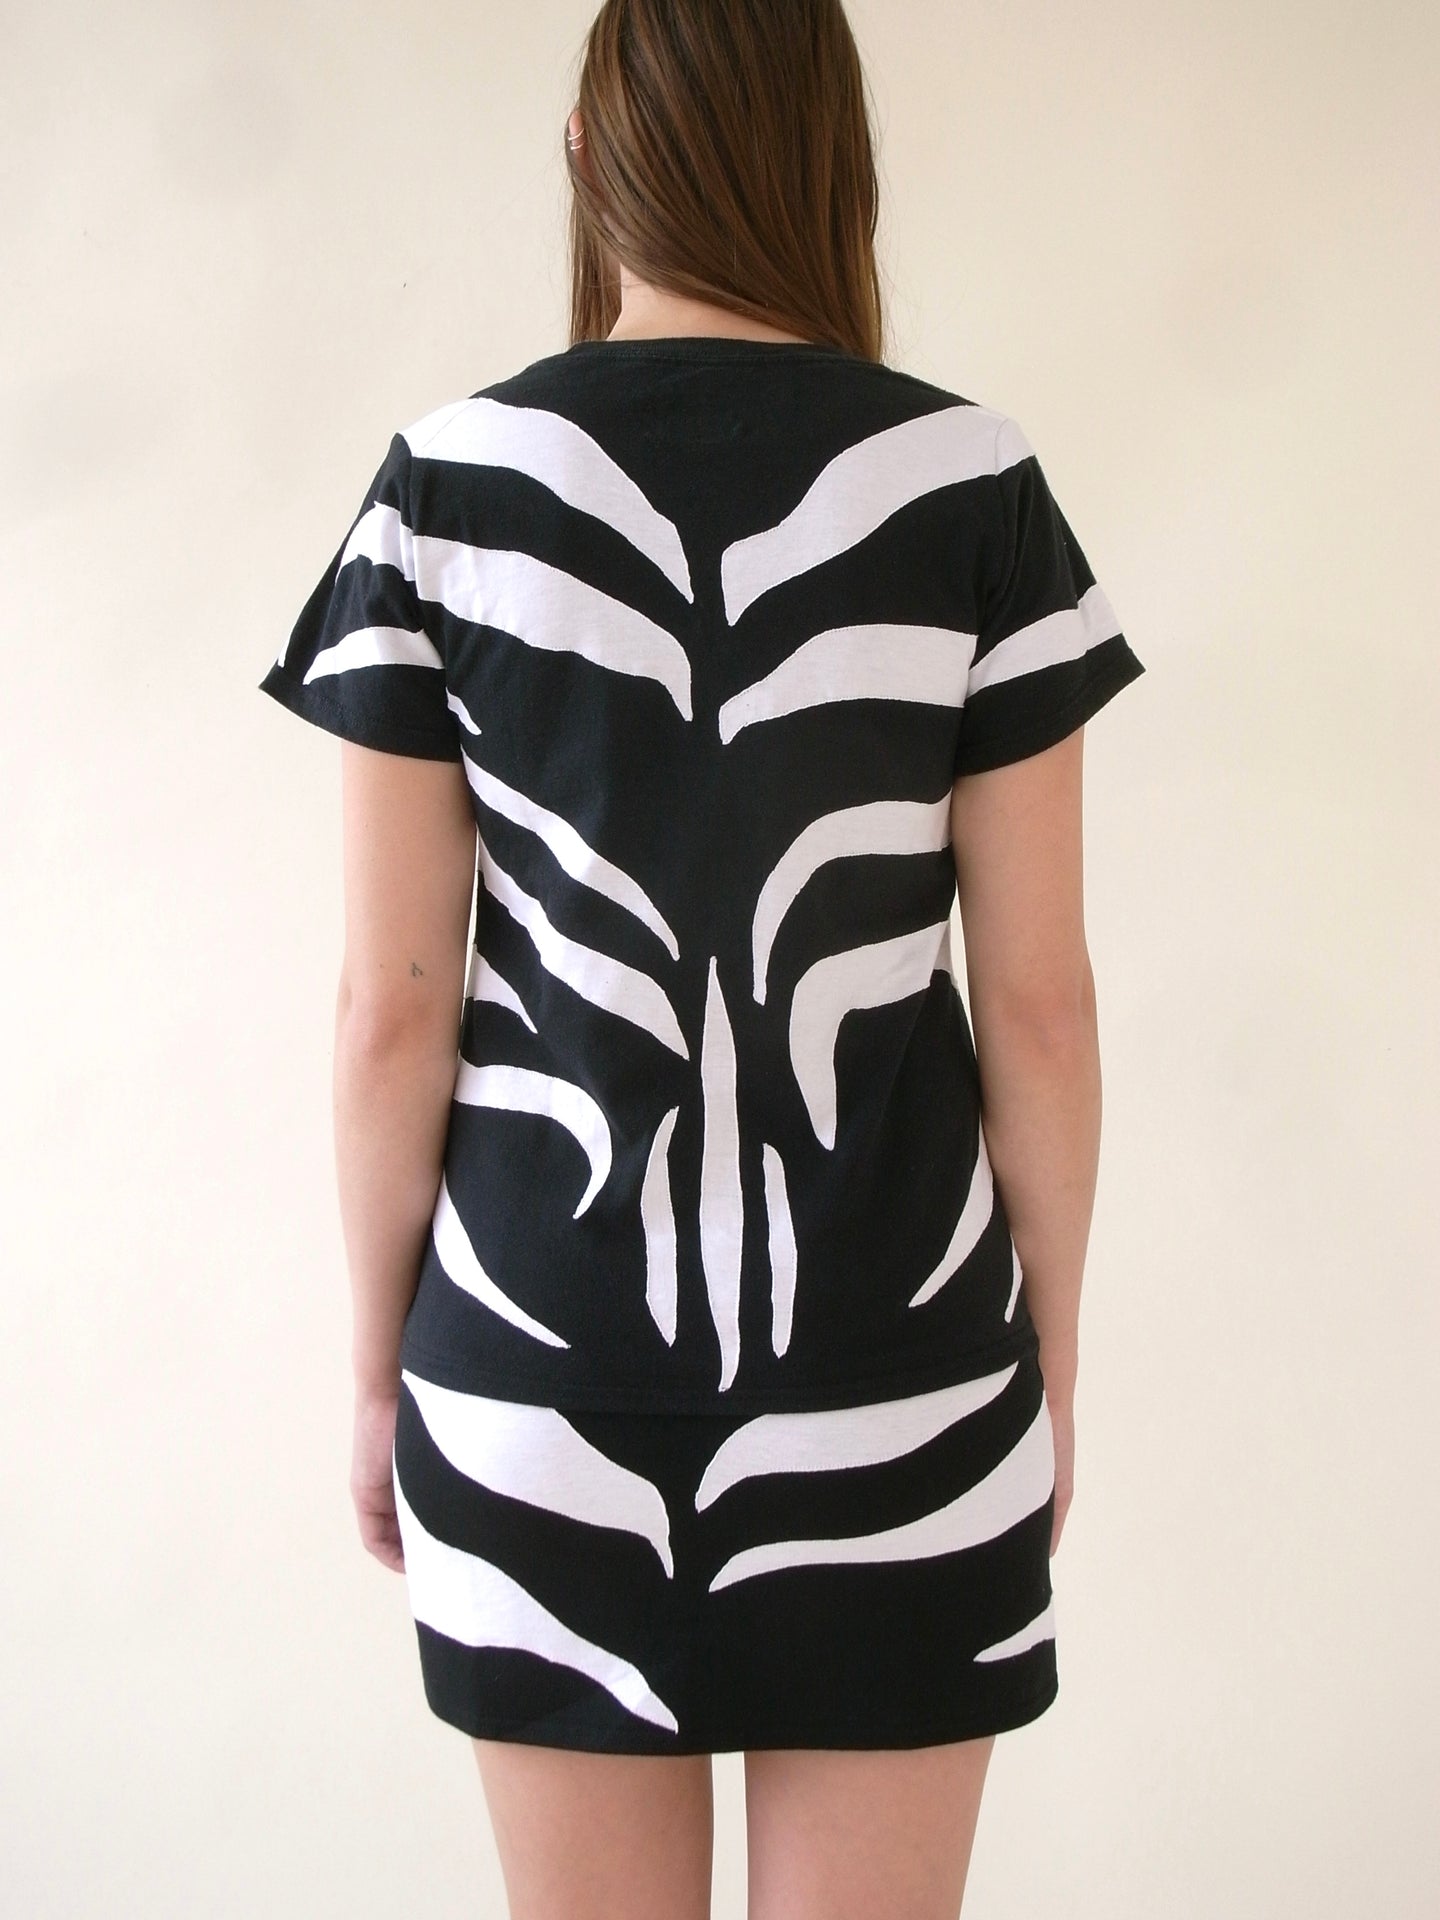 The Reconstituted Zebra T-shirt